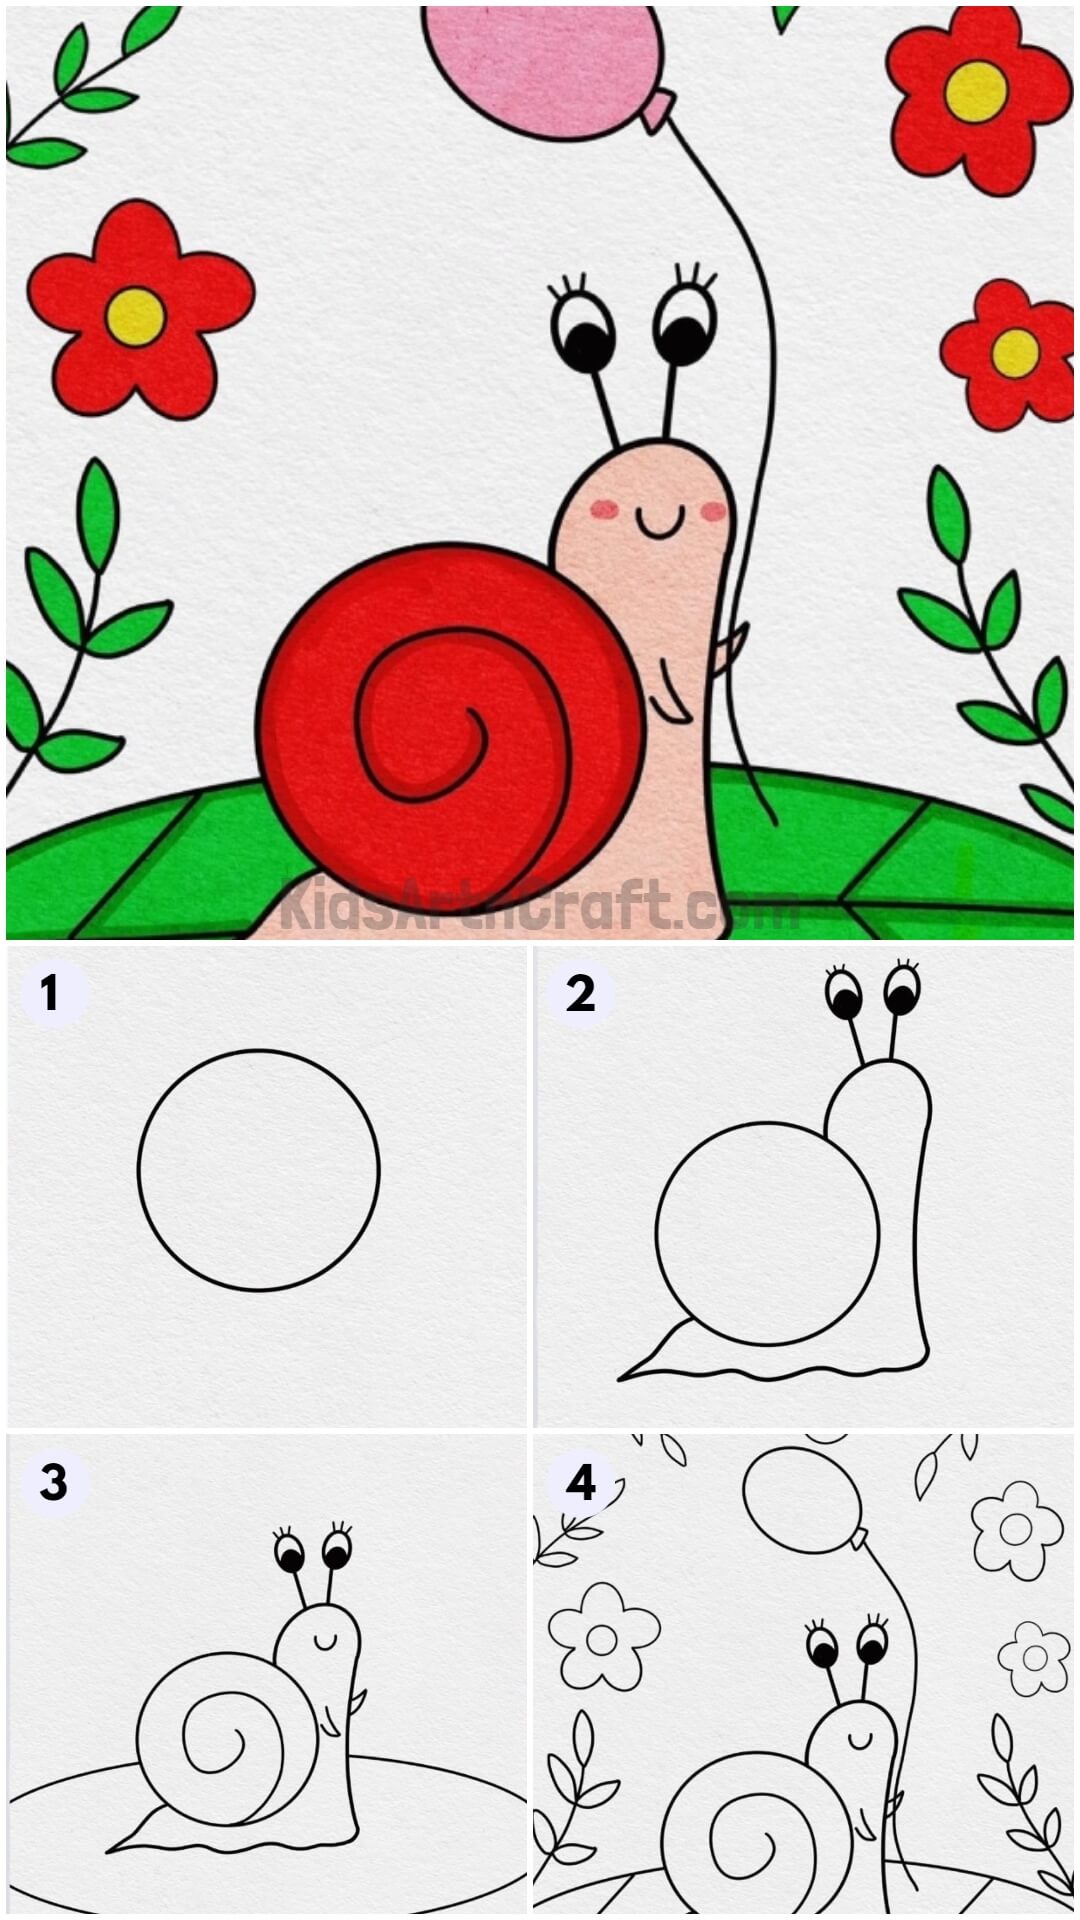  Adorable Snail Drawing Step by step Tutorial For Kids